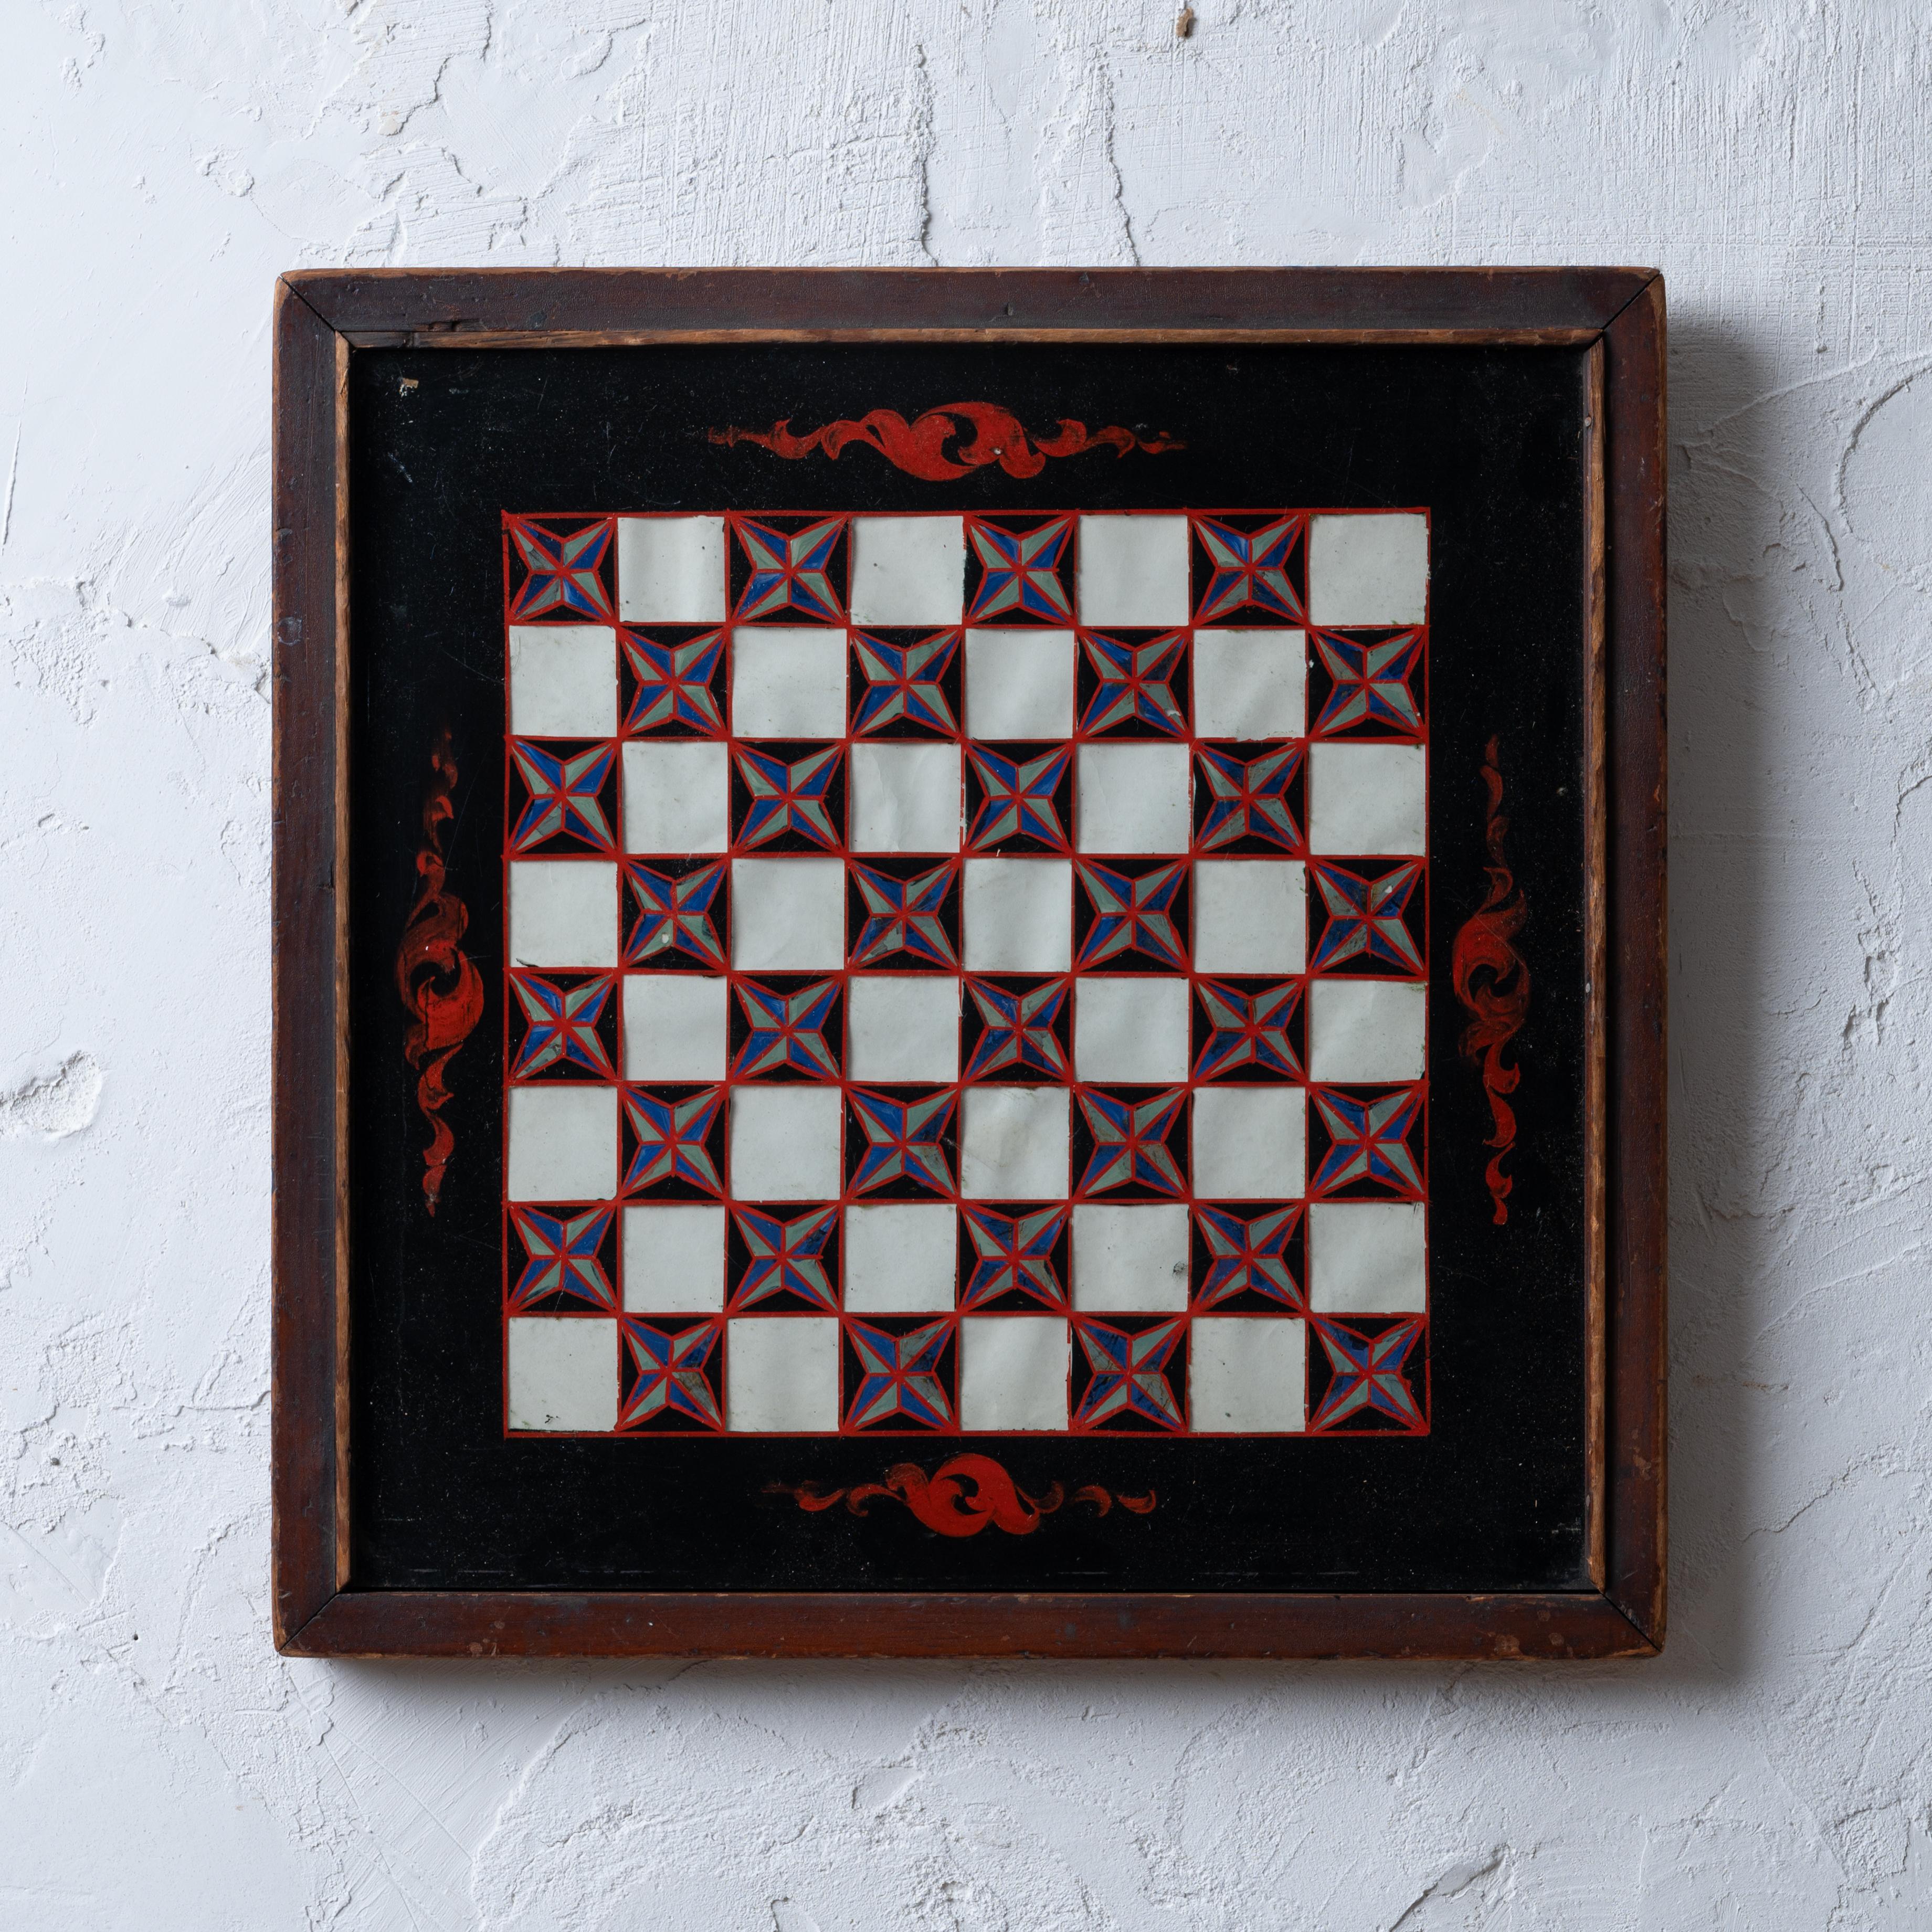 A verre eglomise chess board, circa 1890.

15 by 15 by 1 inches

